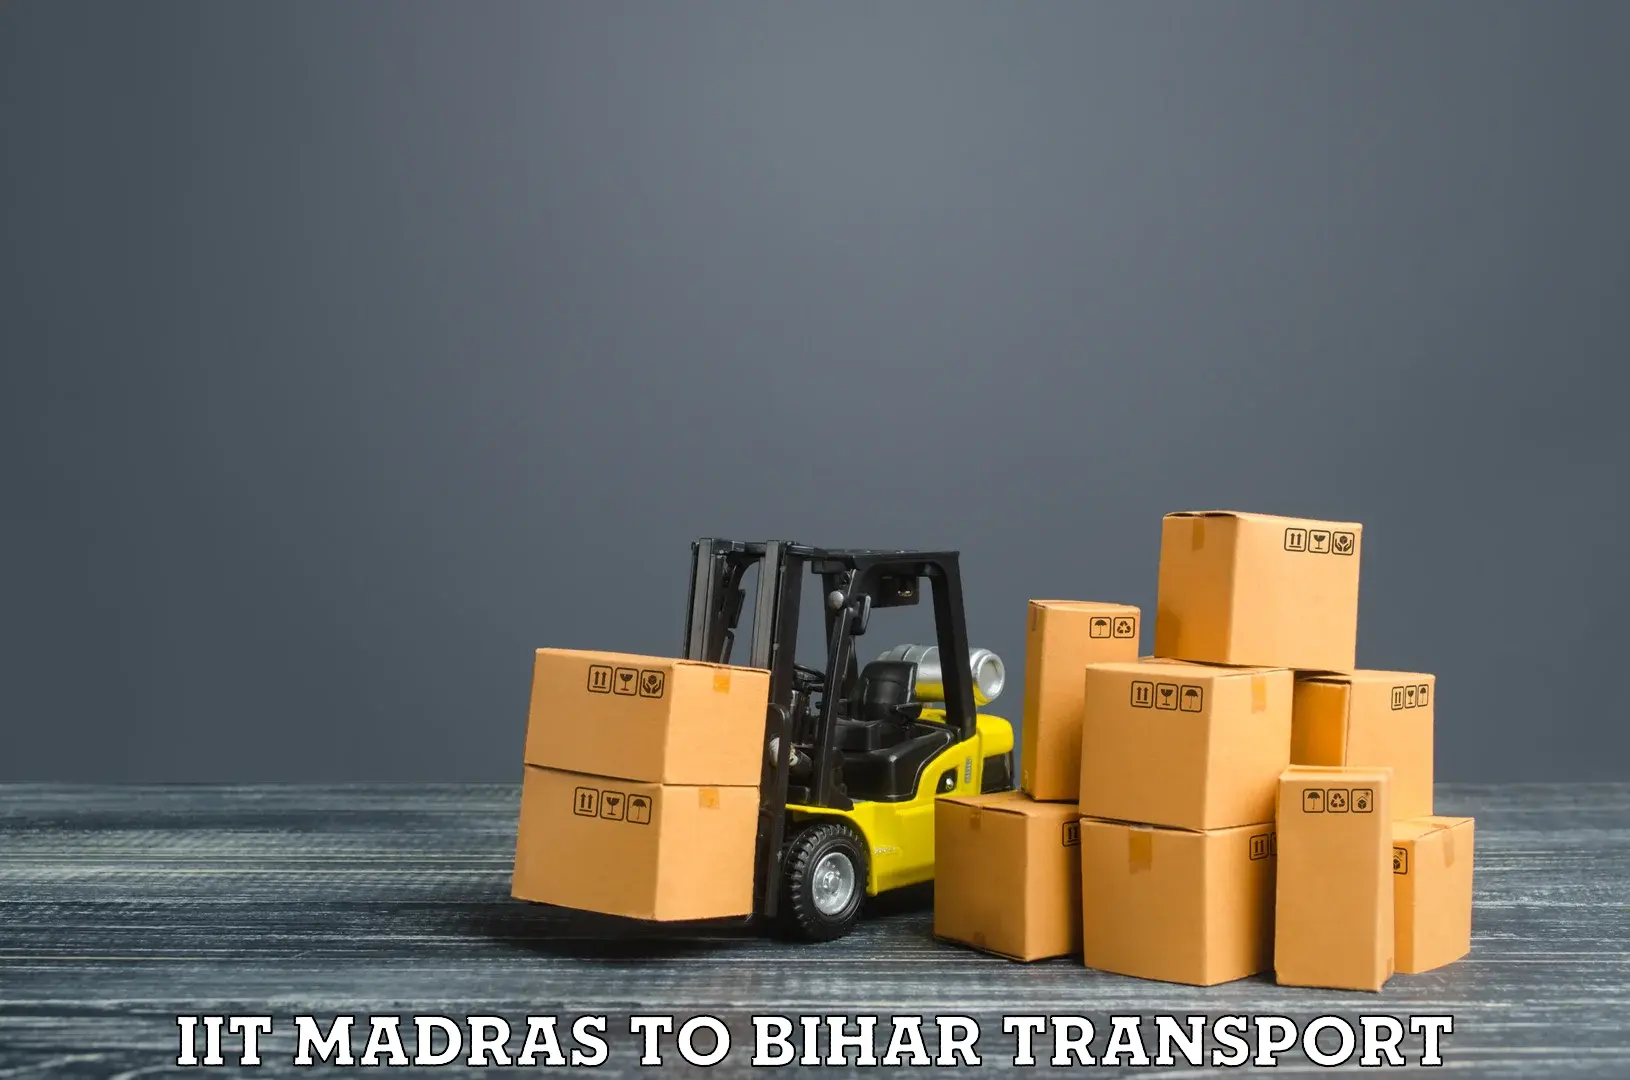 Shipping services IIT Madras to IIT Patna